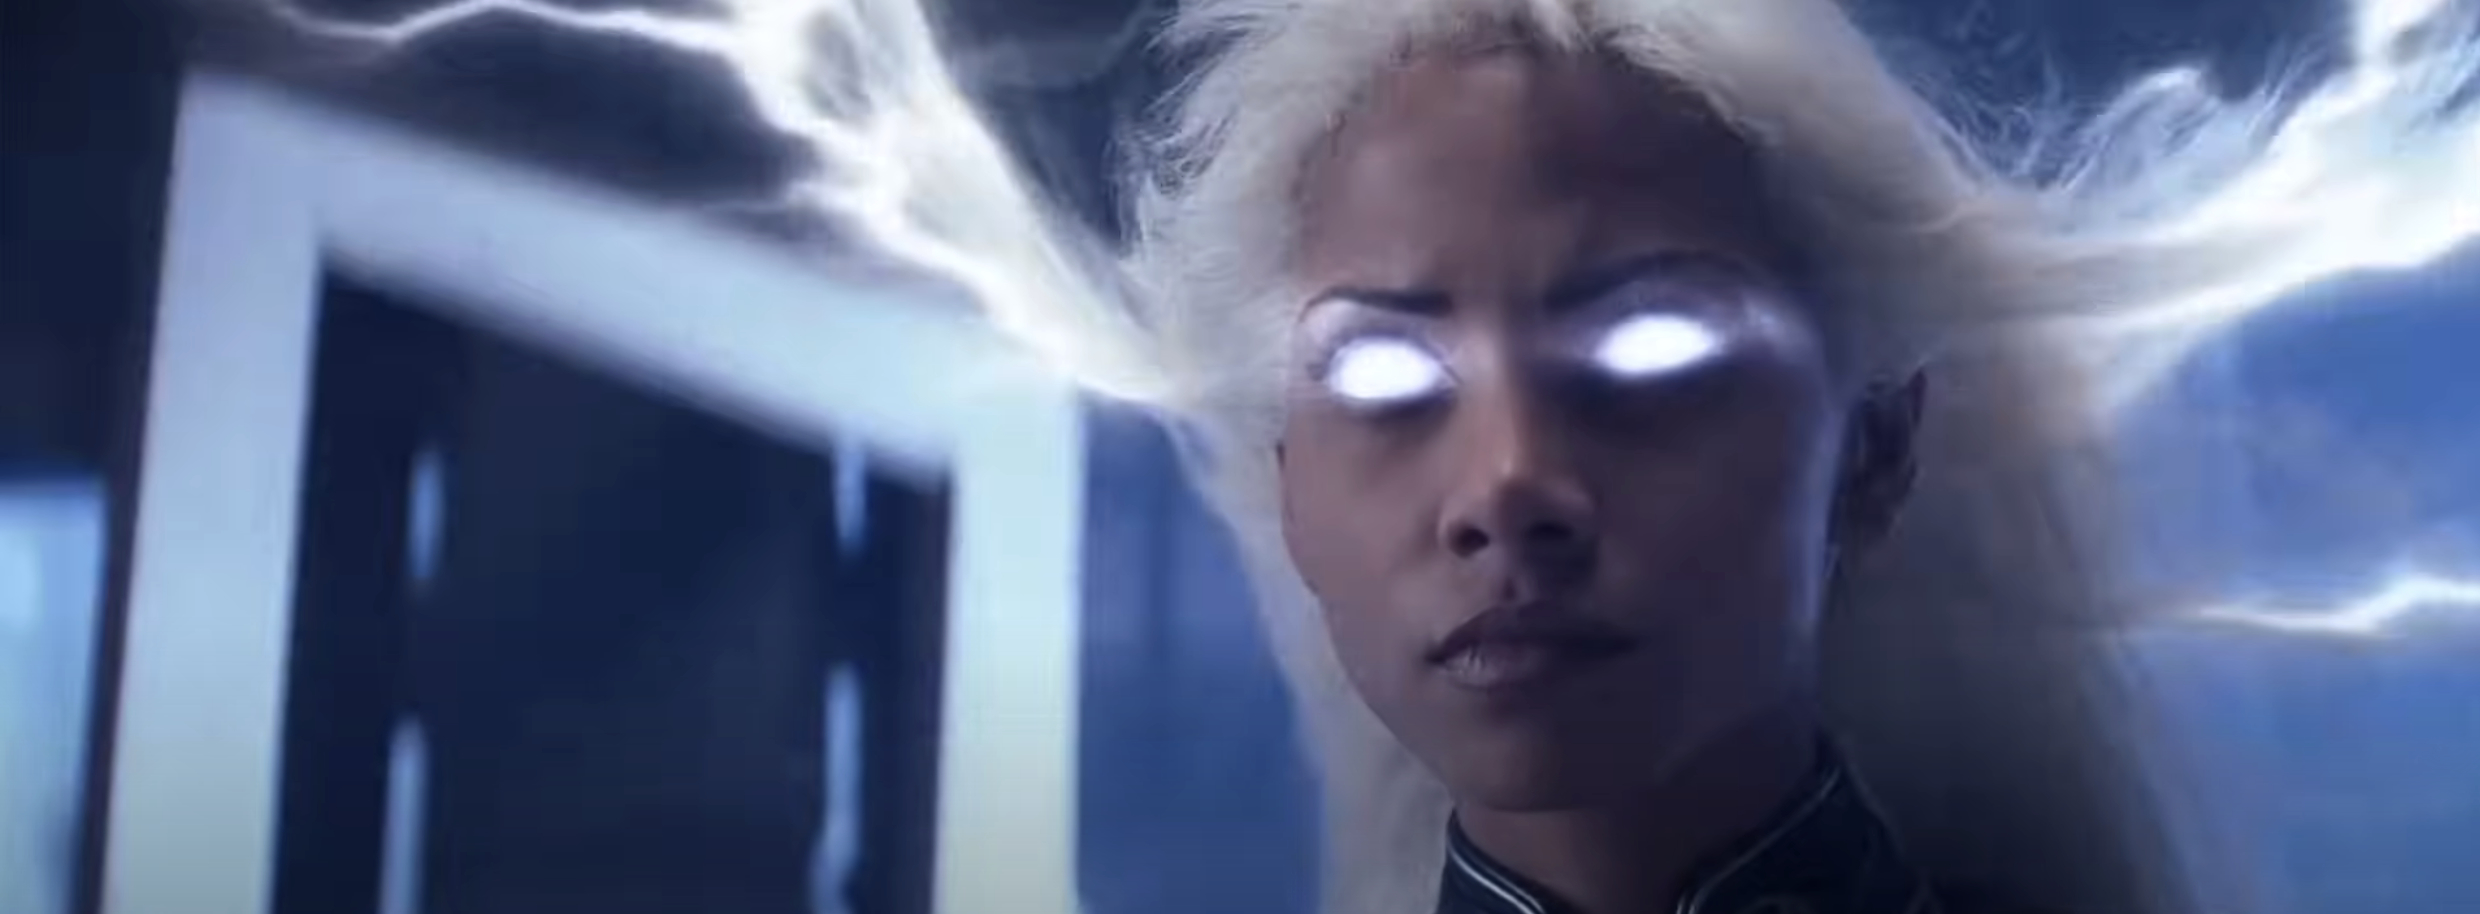 Image of Storm from X-Men with glowing white eyes and lightning emanating from her head. She appears powerful and focused